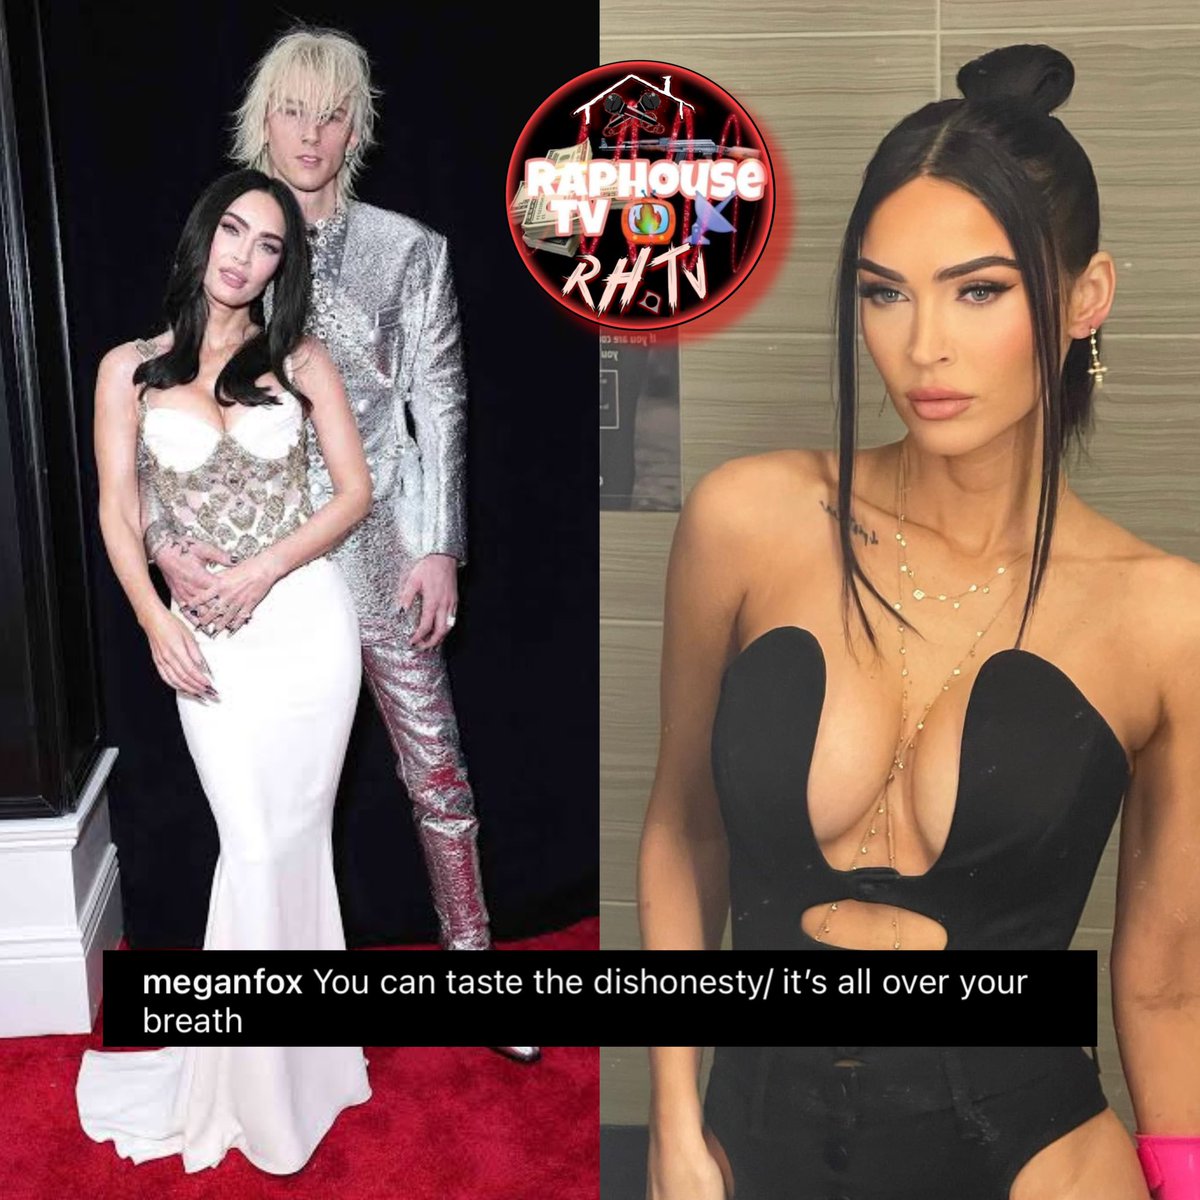 Megan Fox Seemingly Breaks Up with her Boyfriend for years Machine Gun Kelly after he allegedly was unfaithful and cheated on her💔😢